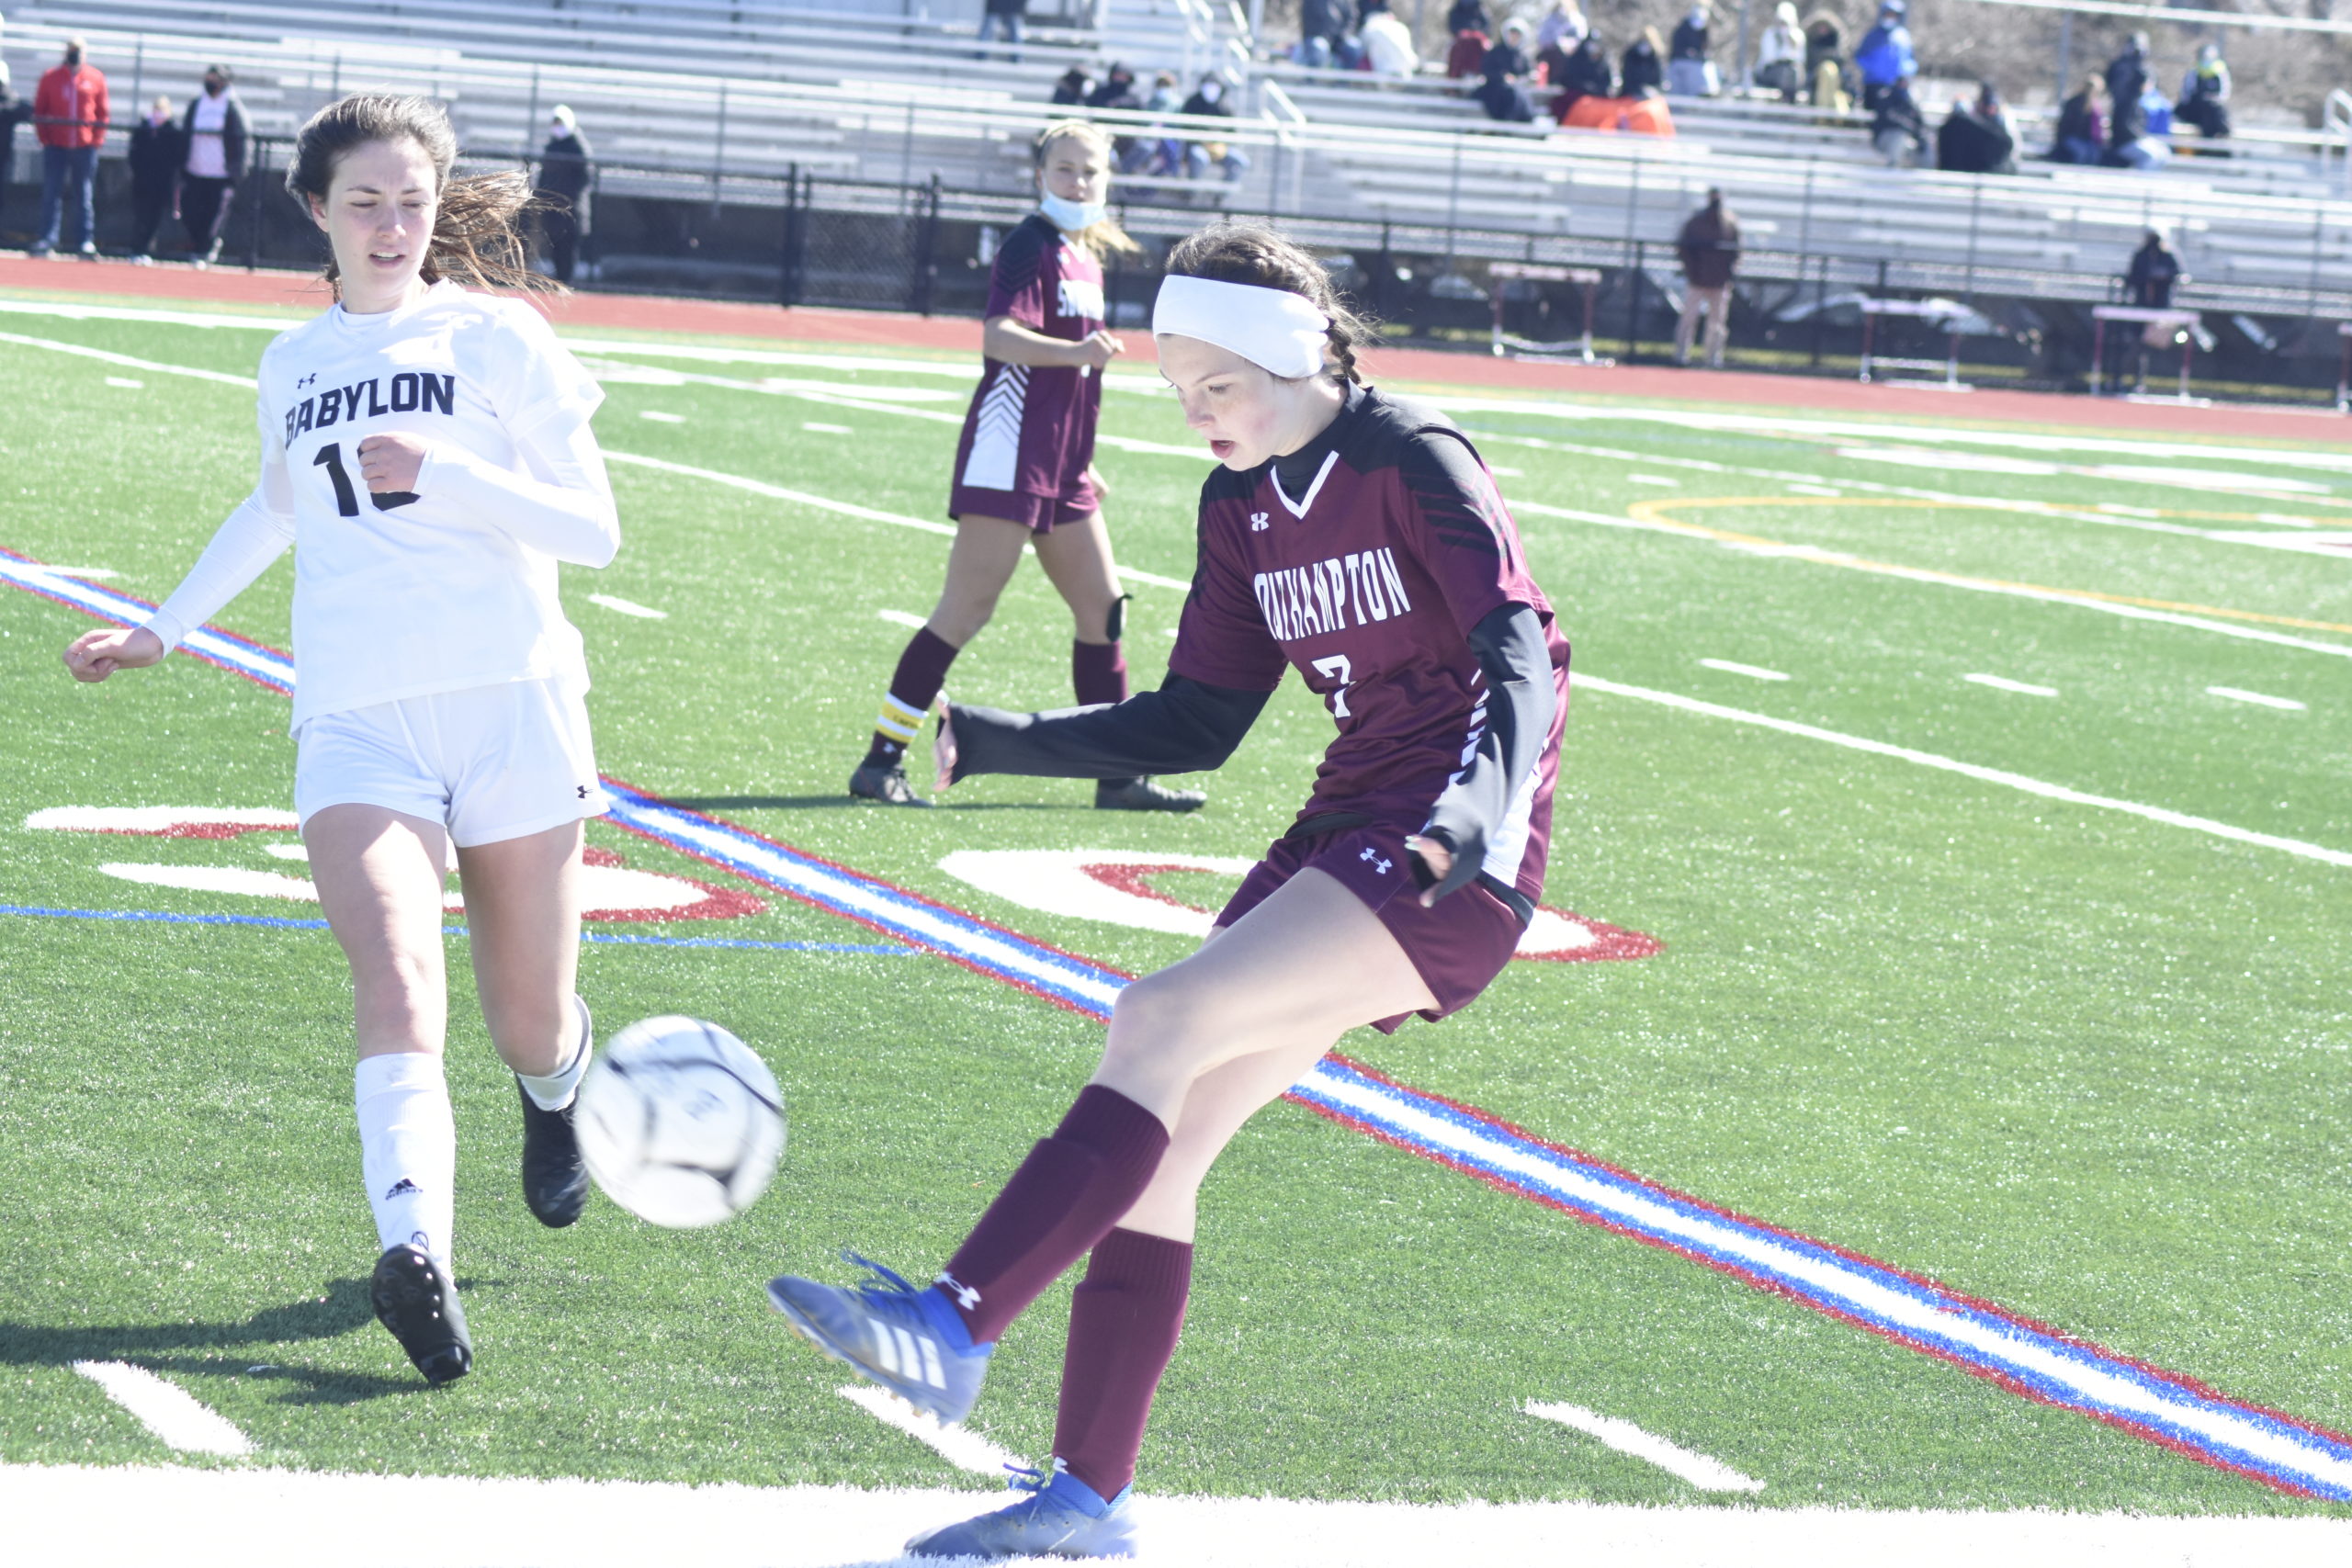 Southampton sophomore defender Hailey Cameron clears the ball.